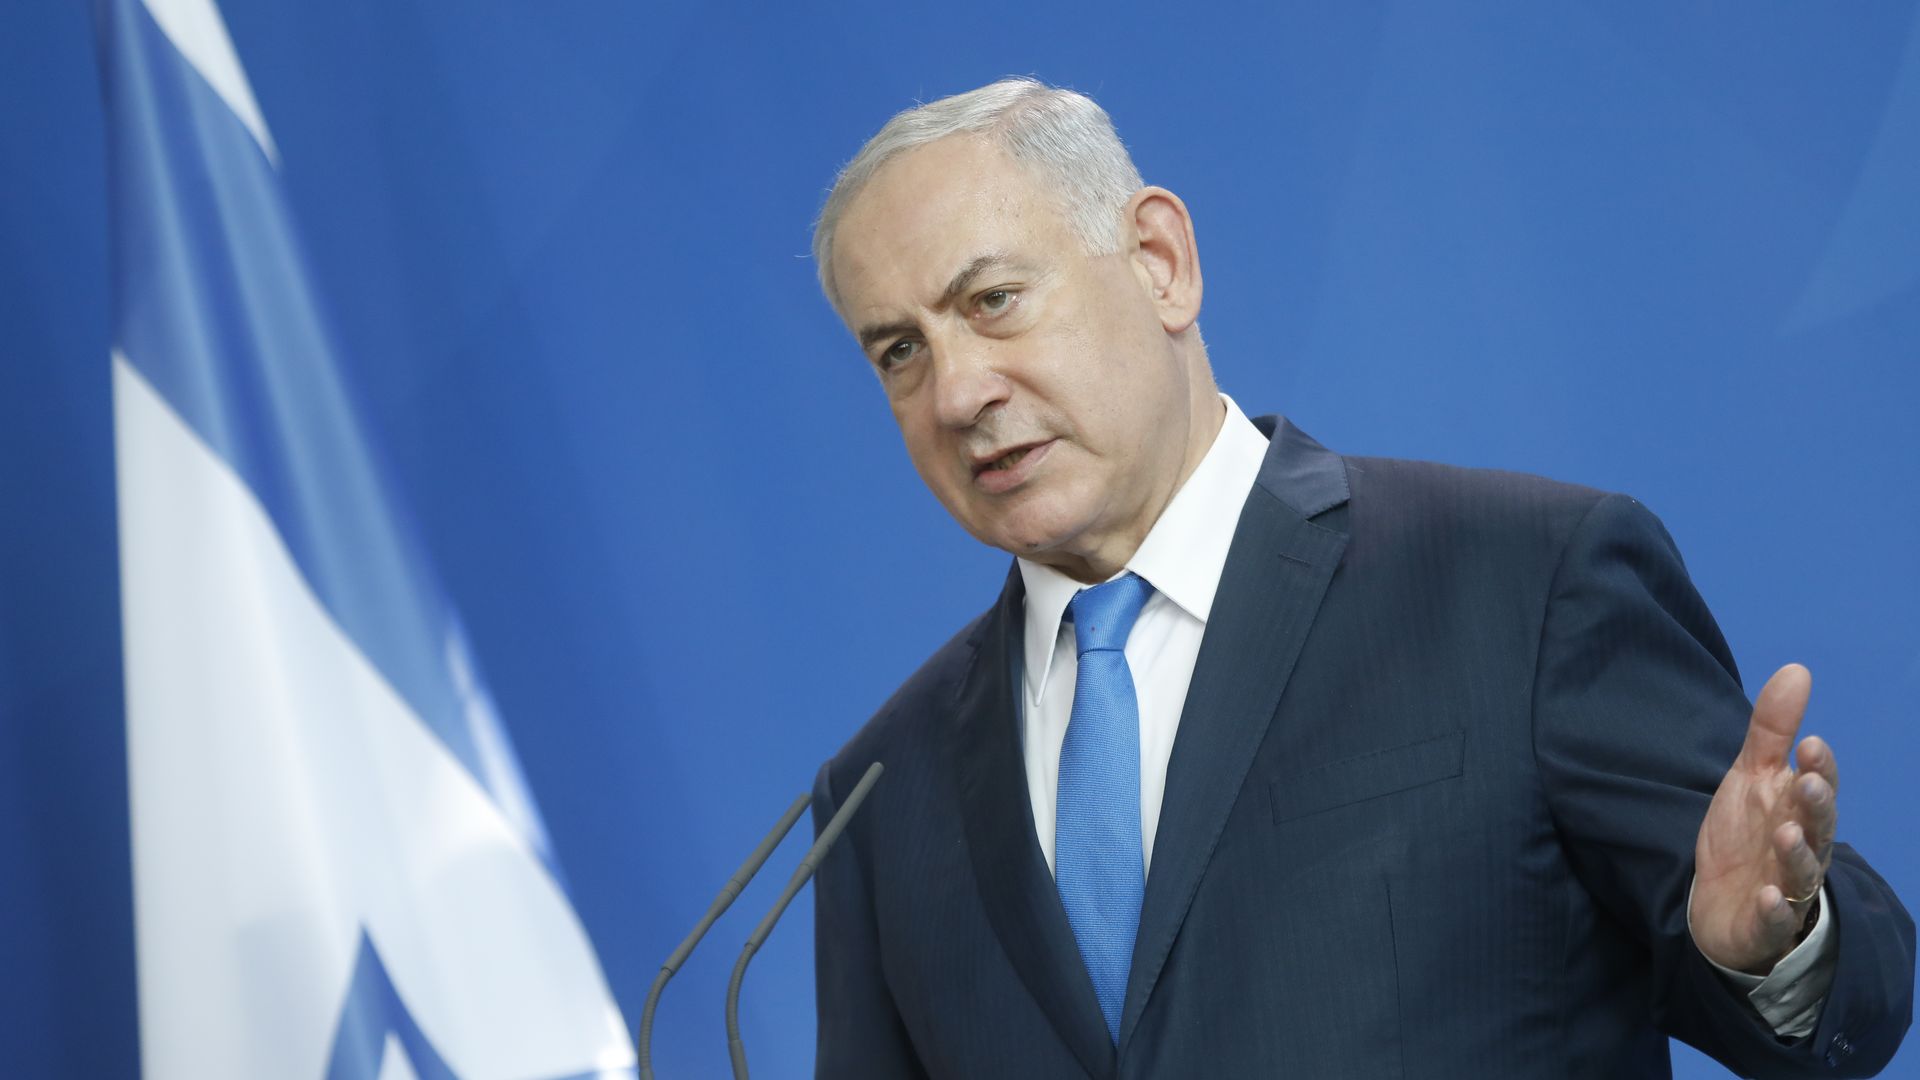 Israel's Prime Minister Benjamin Netanyahu. Photo: Michele Tantussi/Getty Images